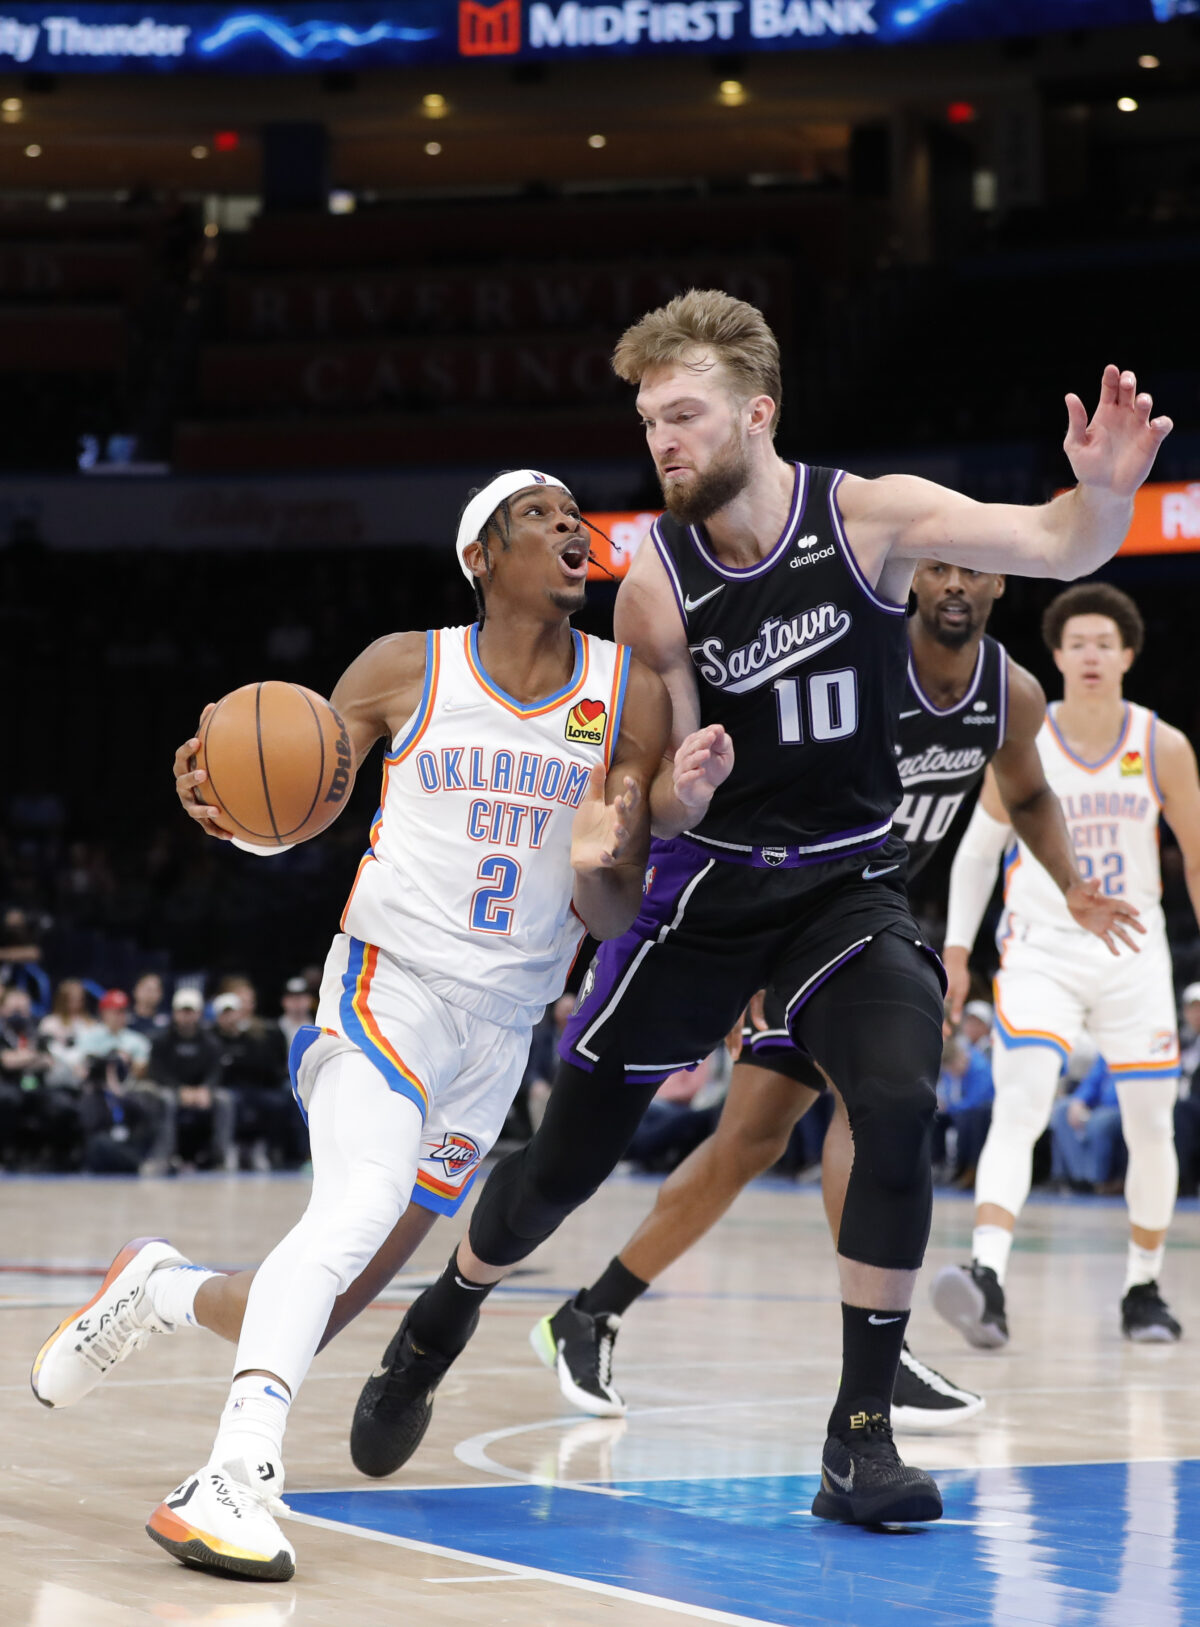 OKC Thunder player grades: SGA scores 37 points on 16 shots in loss to Kings